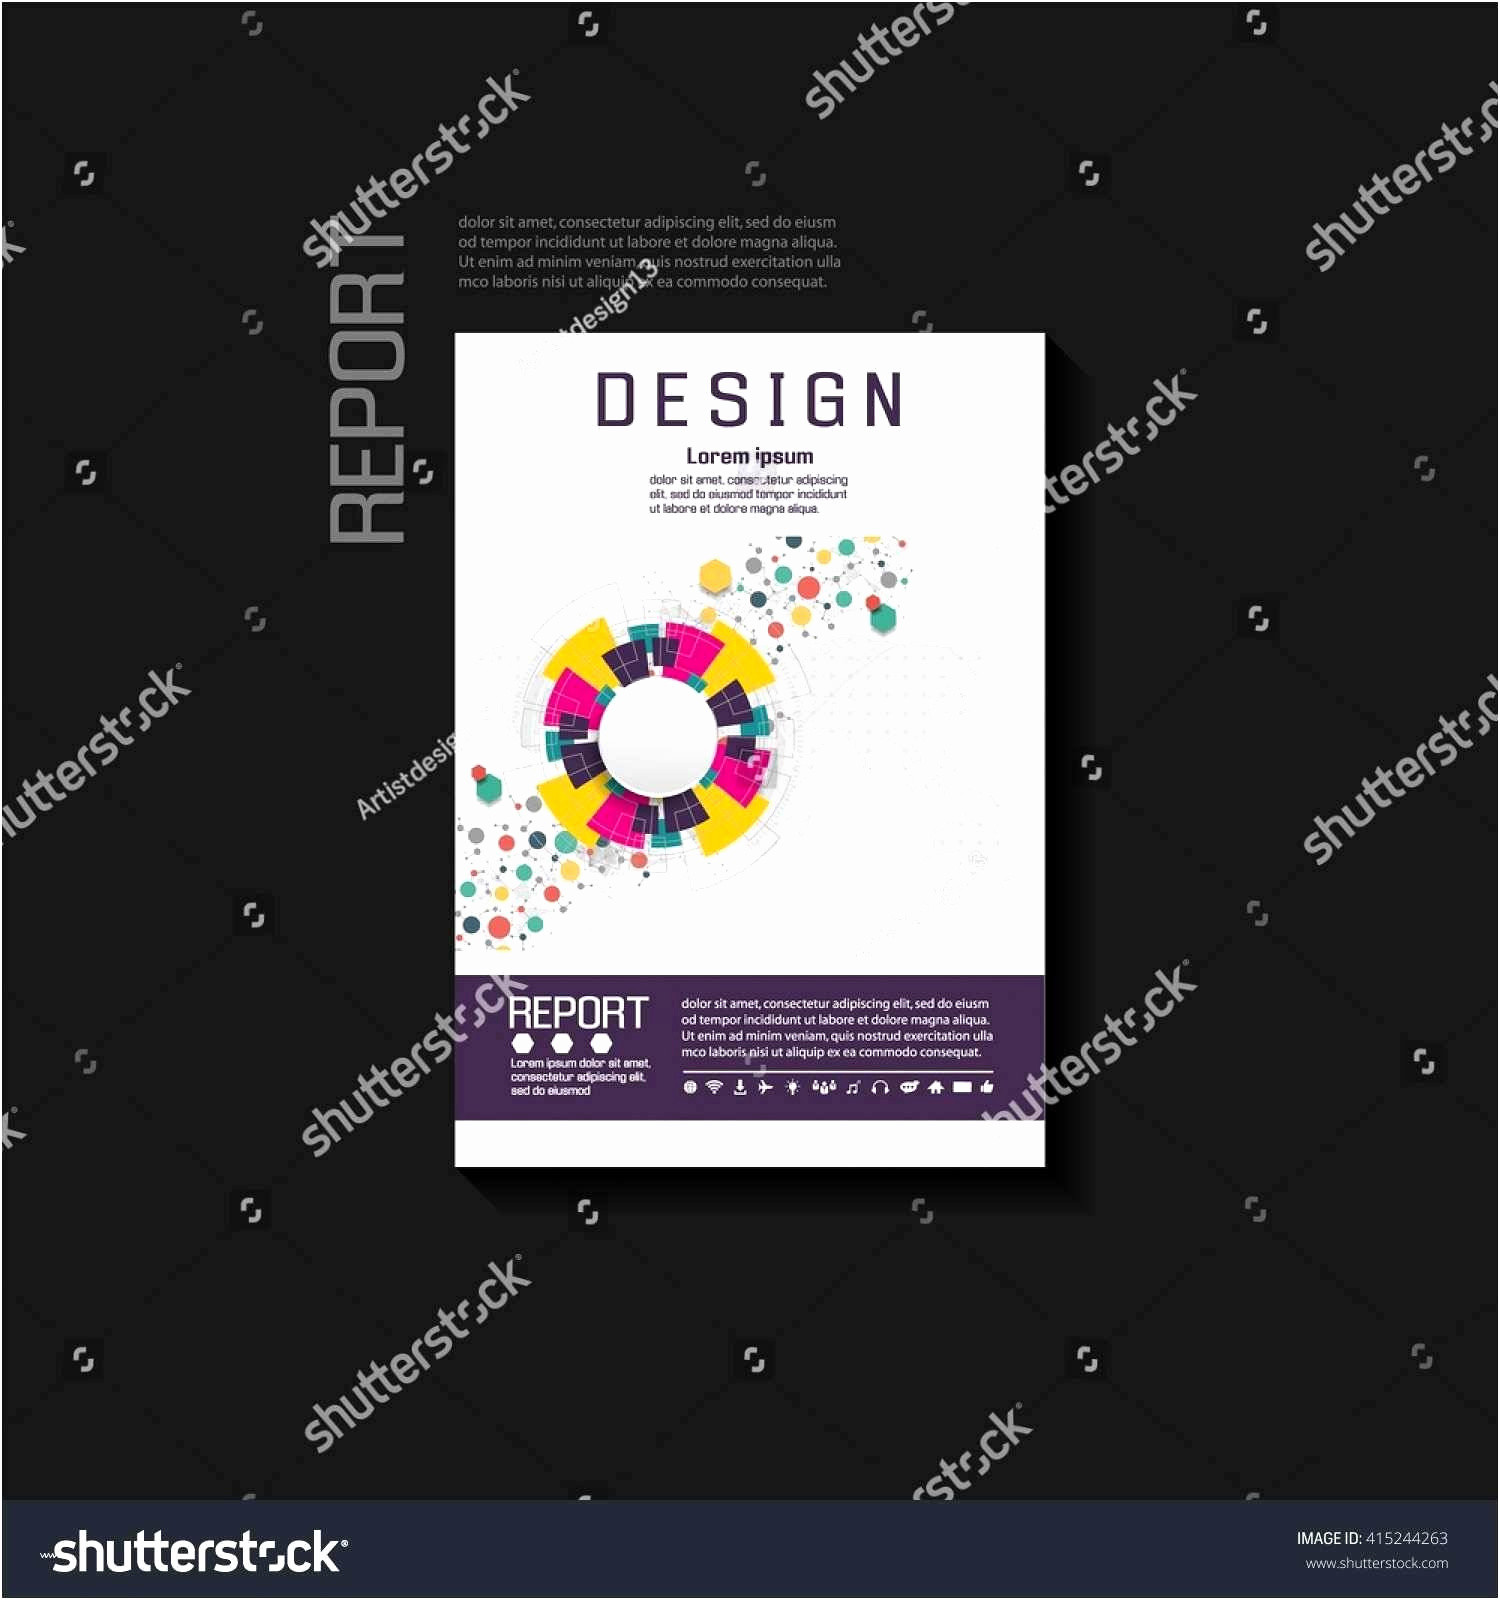 Business Card Holder Archives Dalriadaproject Of Word 2013 Business Card Template